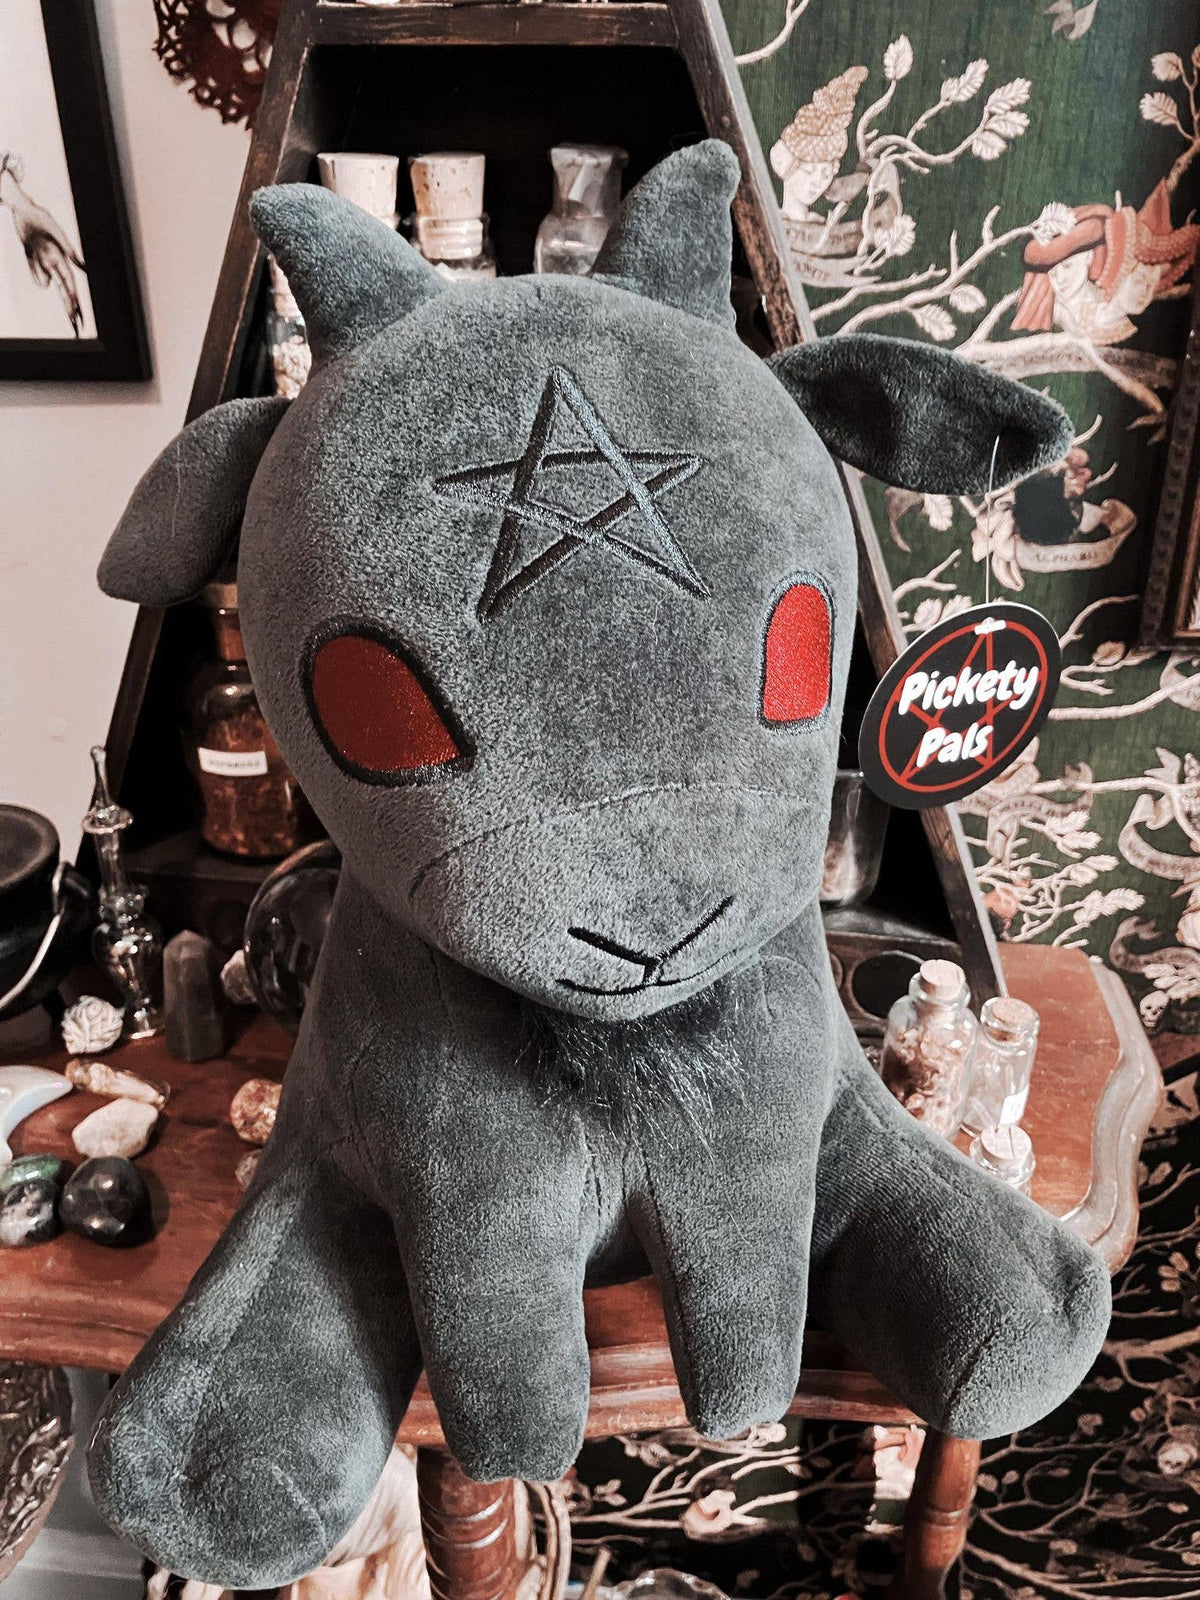 Pickety Pals - "Baphy" - Witchy Baby Goat Plushie: Lavender